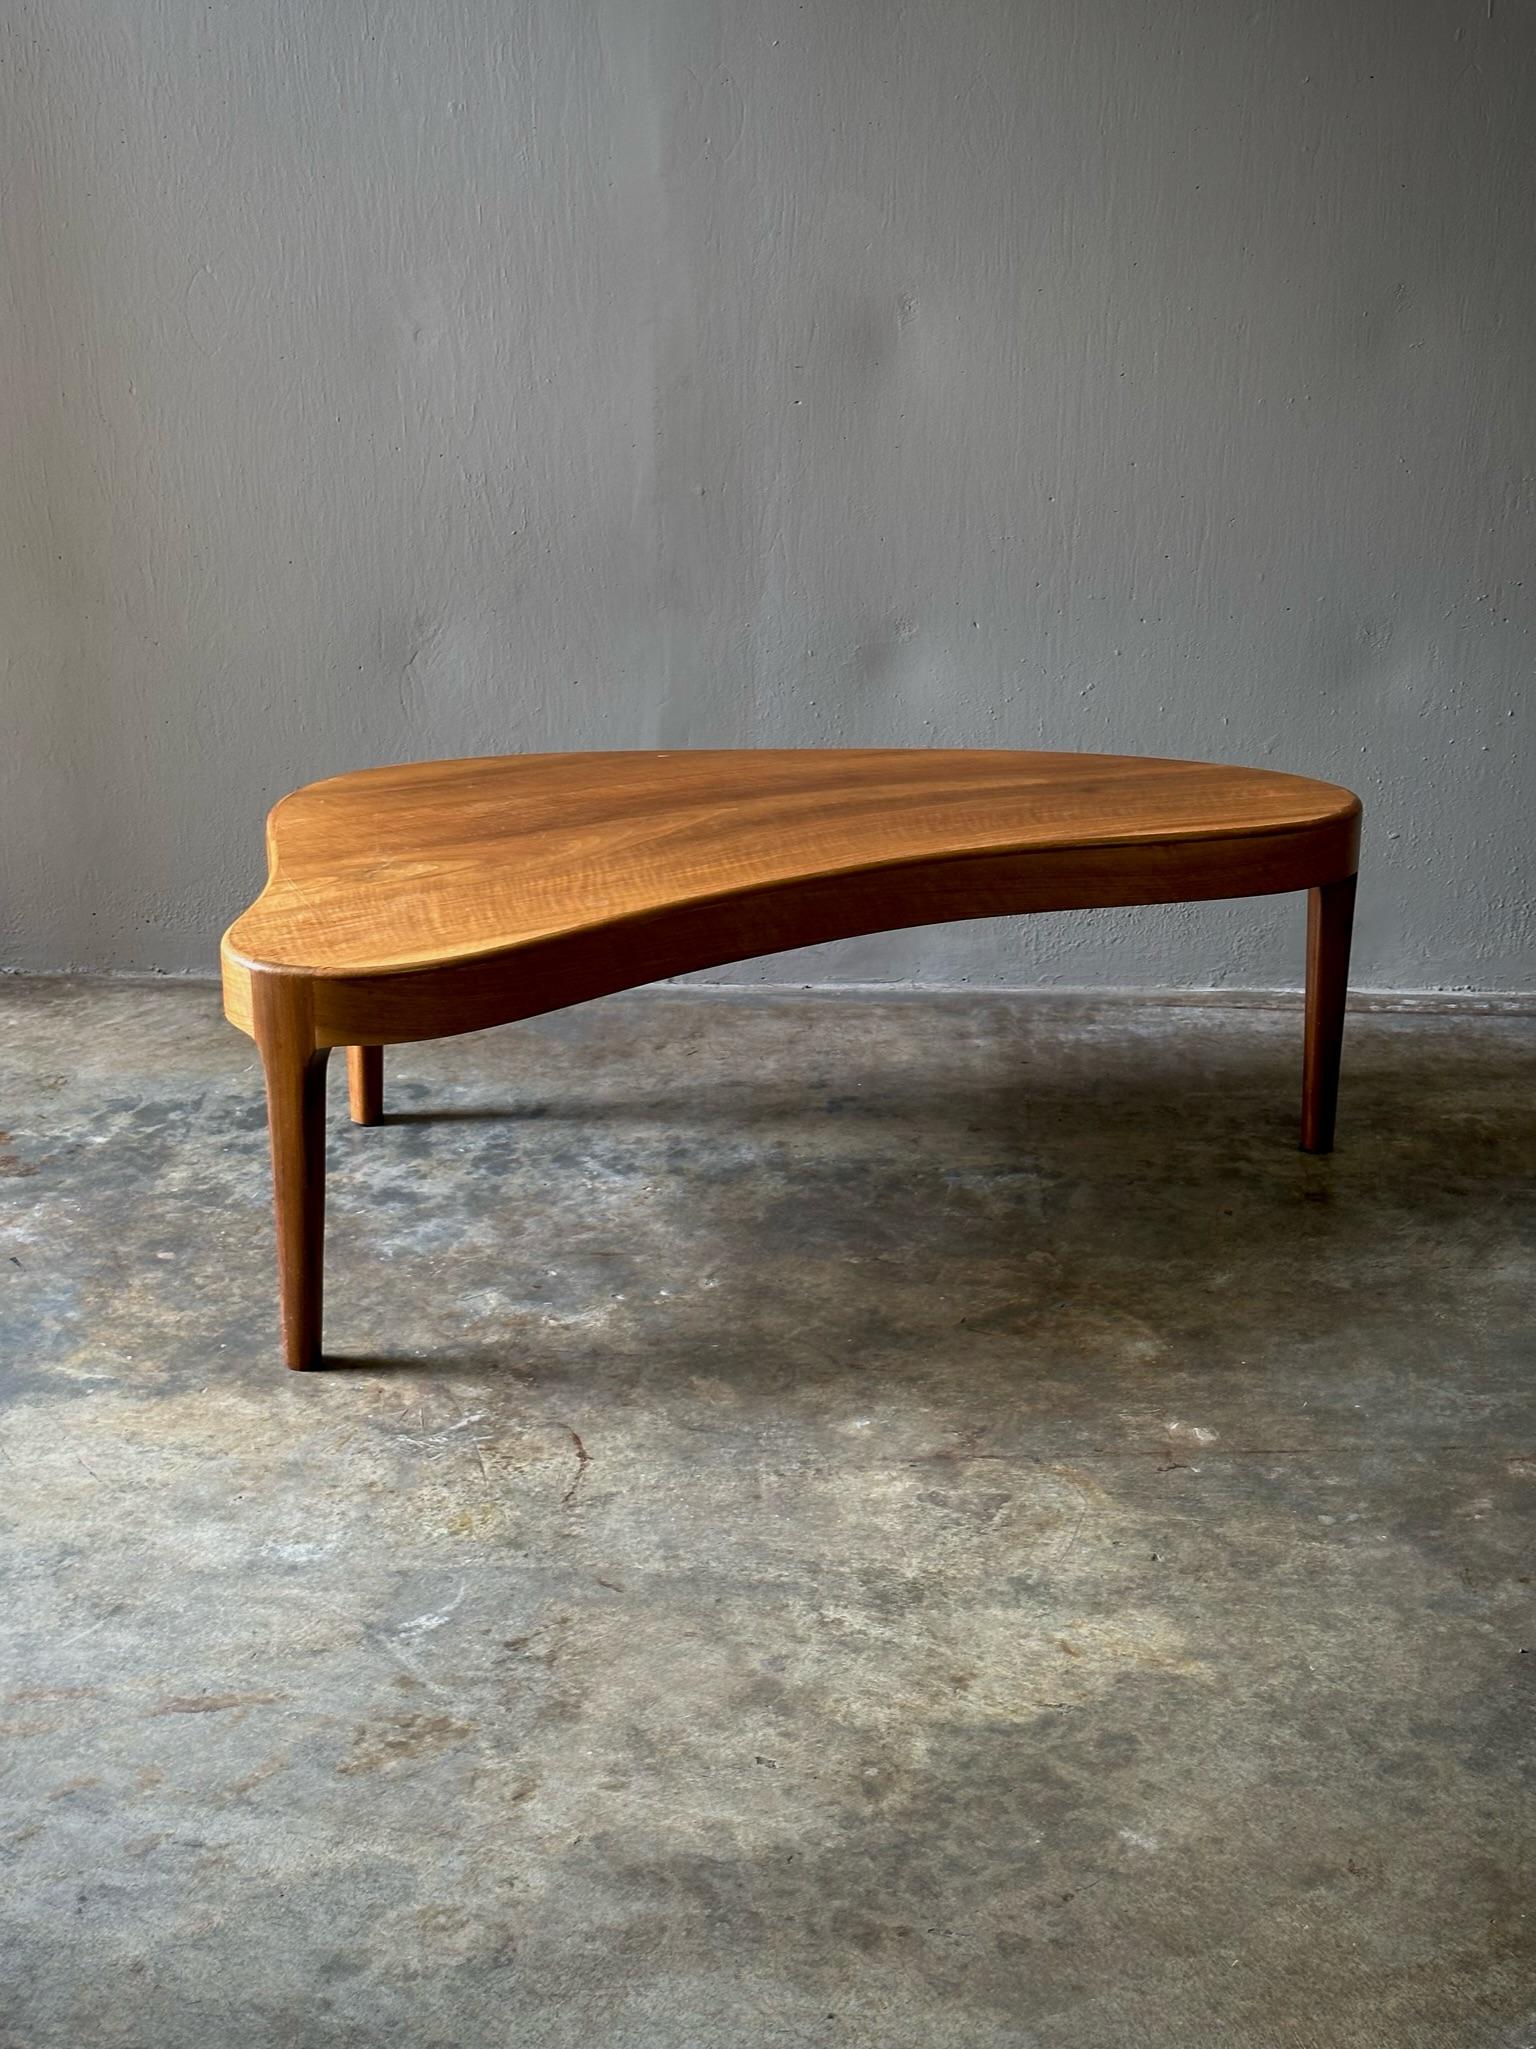 1950s Danish solid wood coffee table featuring slightly tapering three legged base and graphic, asymmetrical surface shape. Sleek and sexy yet with an organic, grounded sensibility.

Denmark, circa 1950

Dimensions: 50W x 26D x 17H